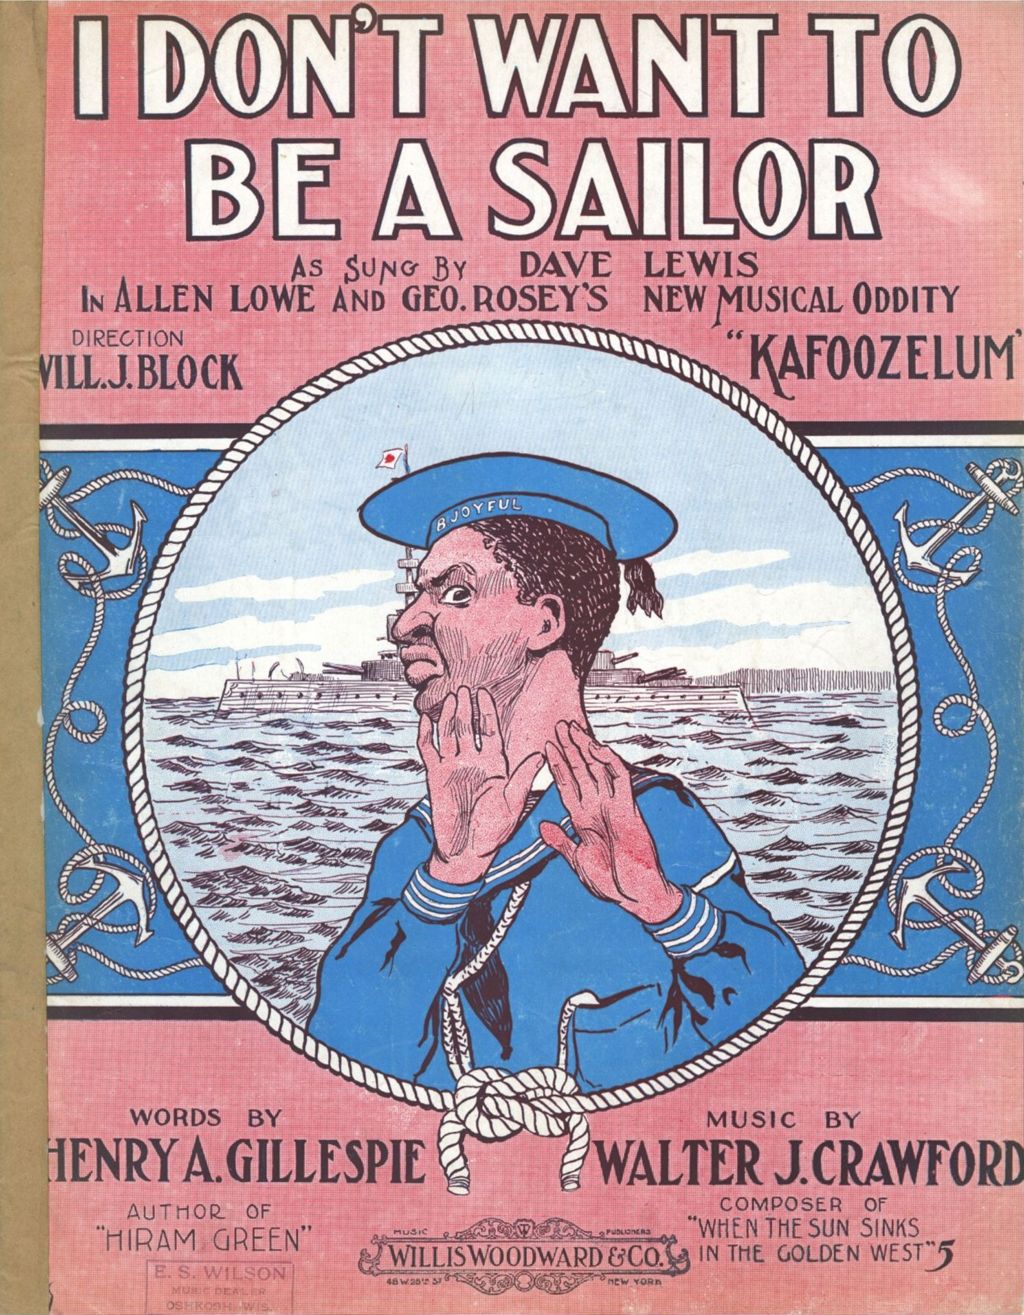 Miniature of I Don't Want to be a Sailor